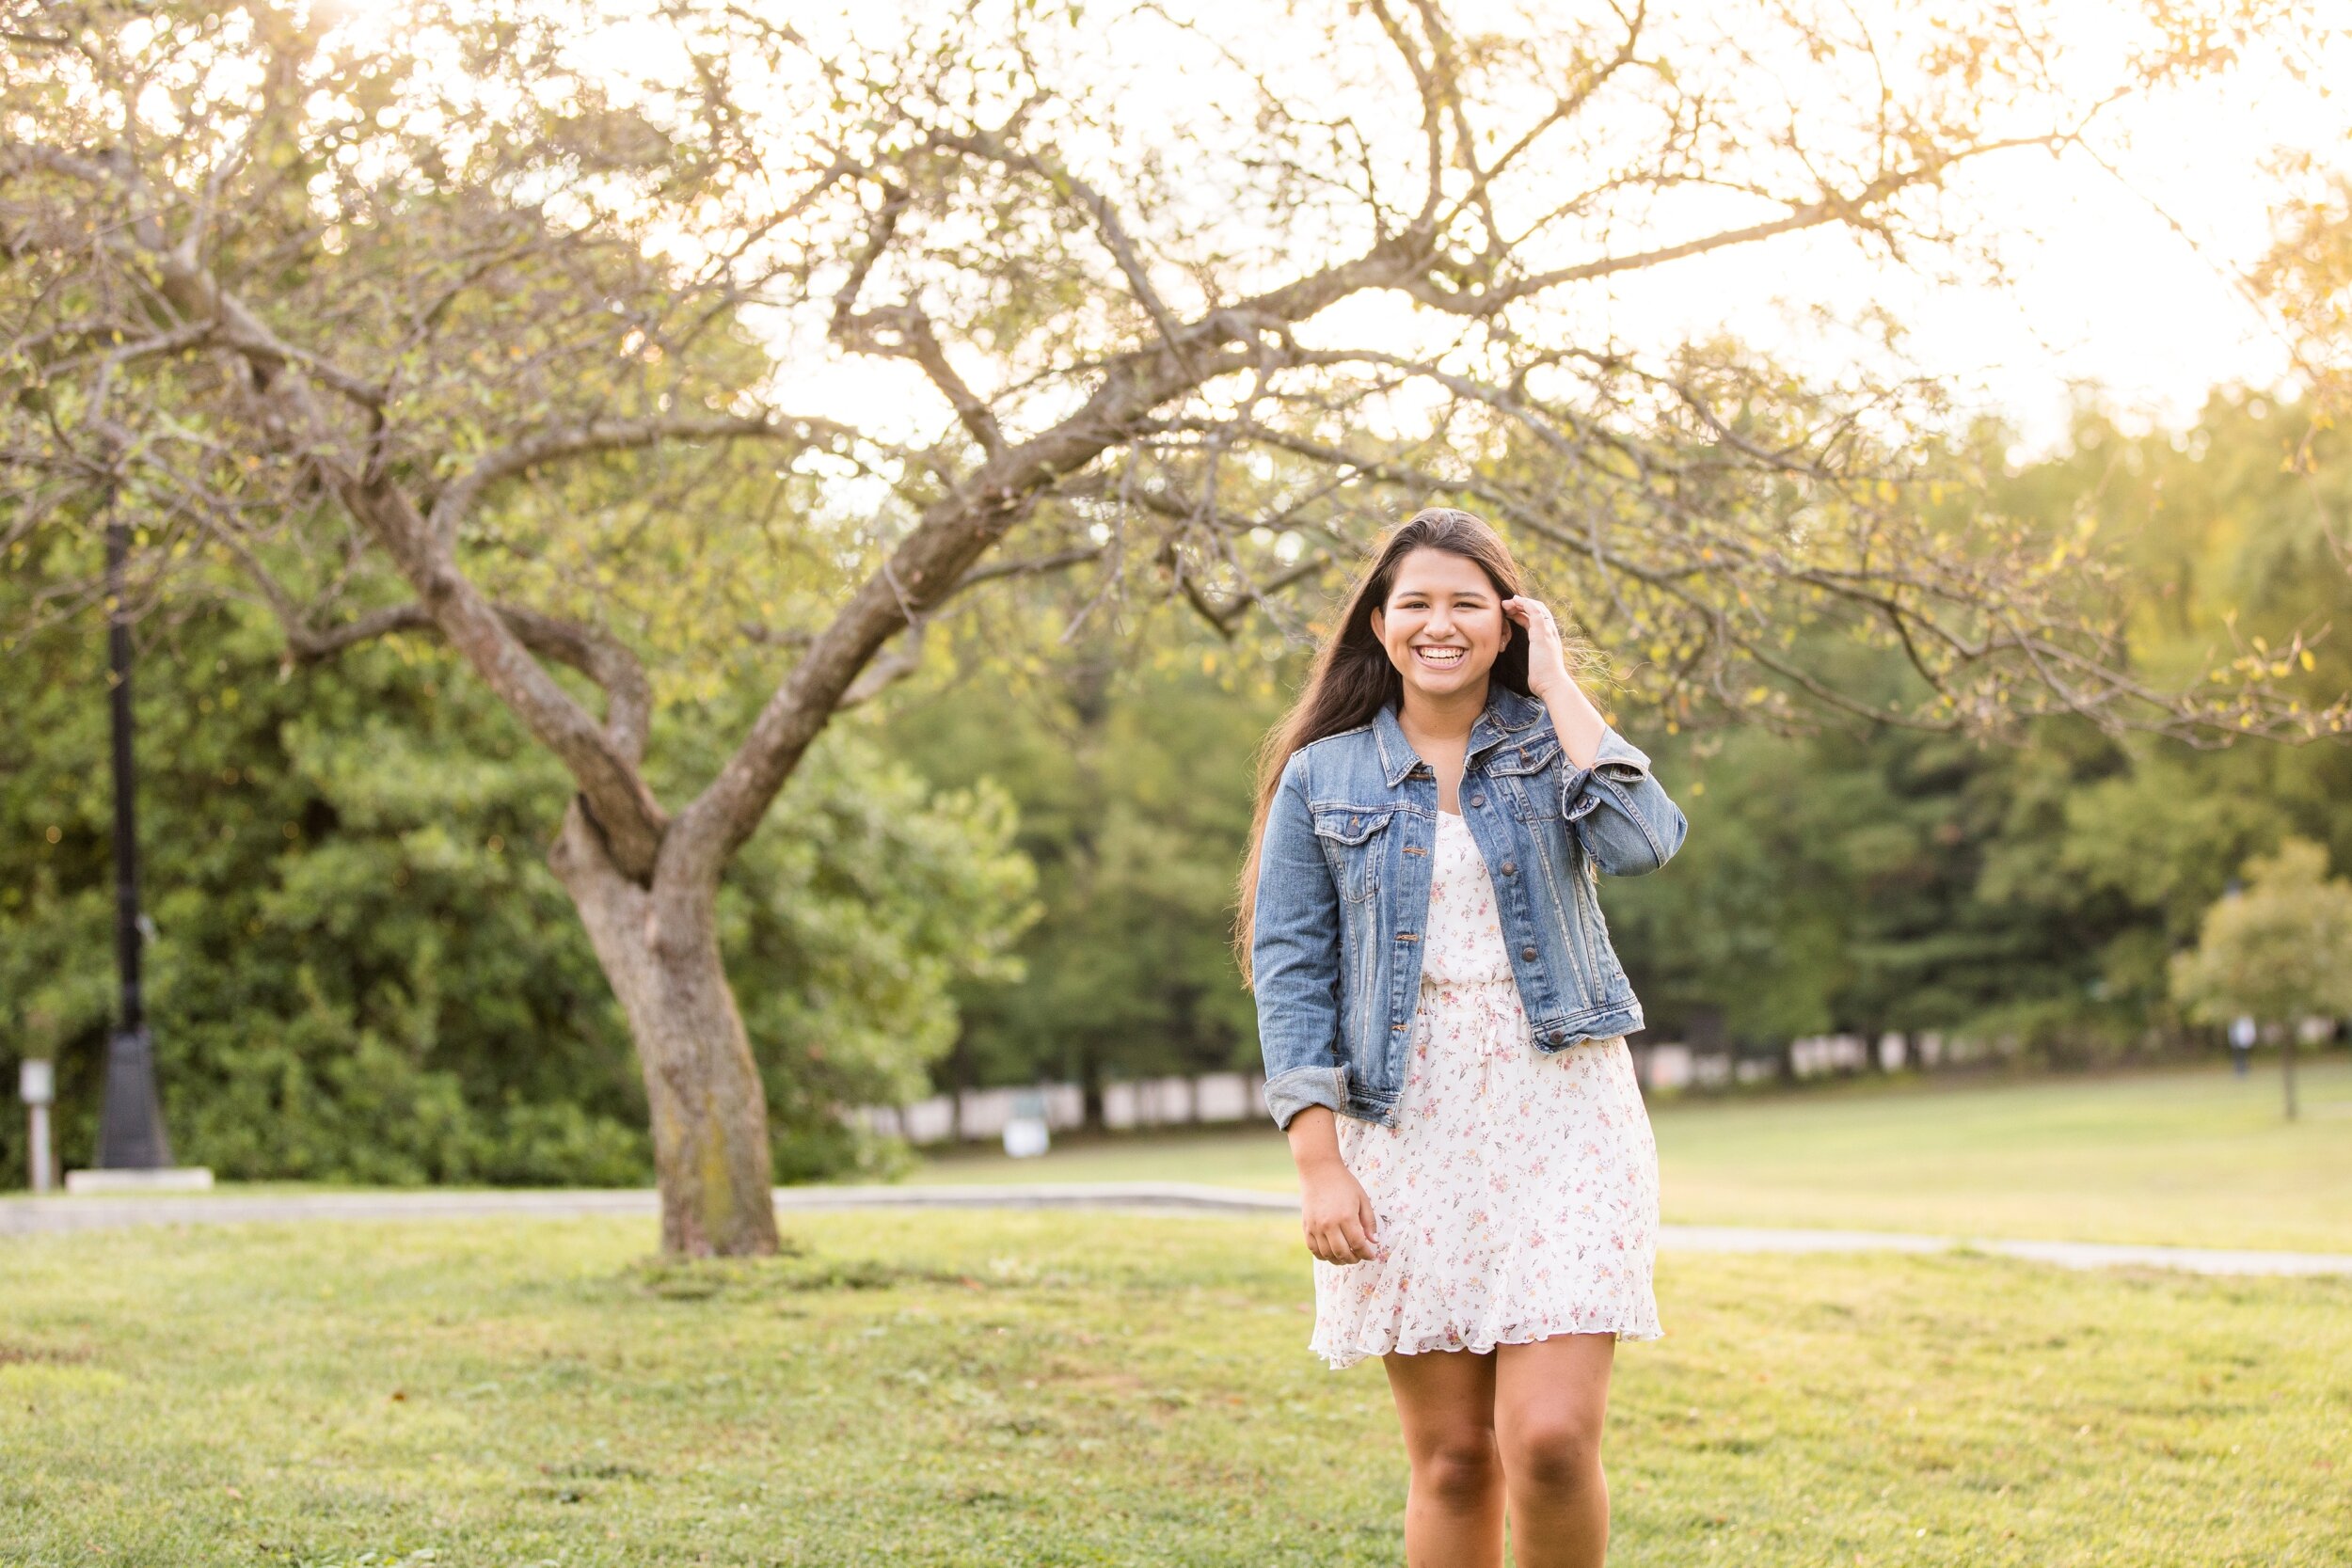 best locations for senior photos in pittsburgh, pittsburgh senior photographer, hartwood acres senior photos, cranberry township senior photographer, outfit ideas for senior photos